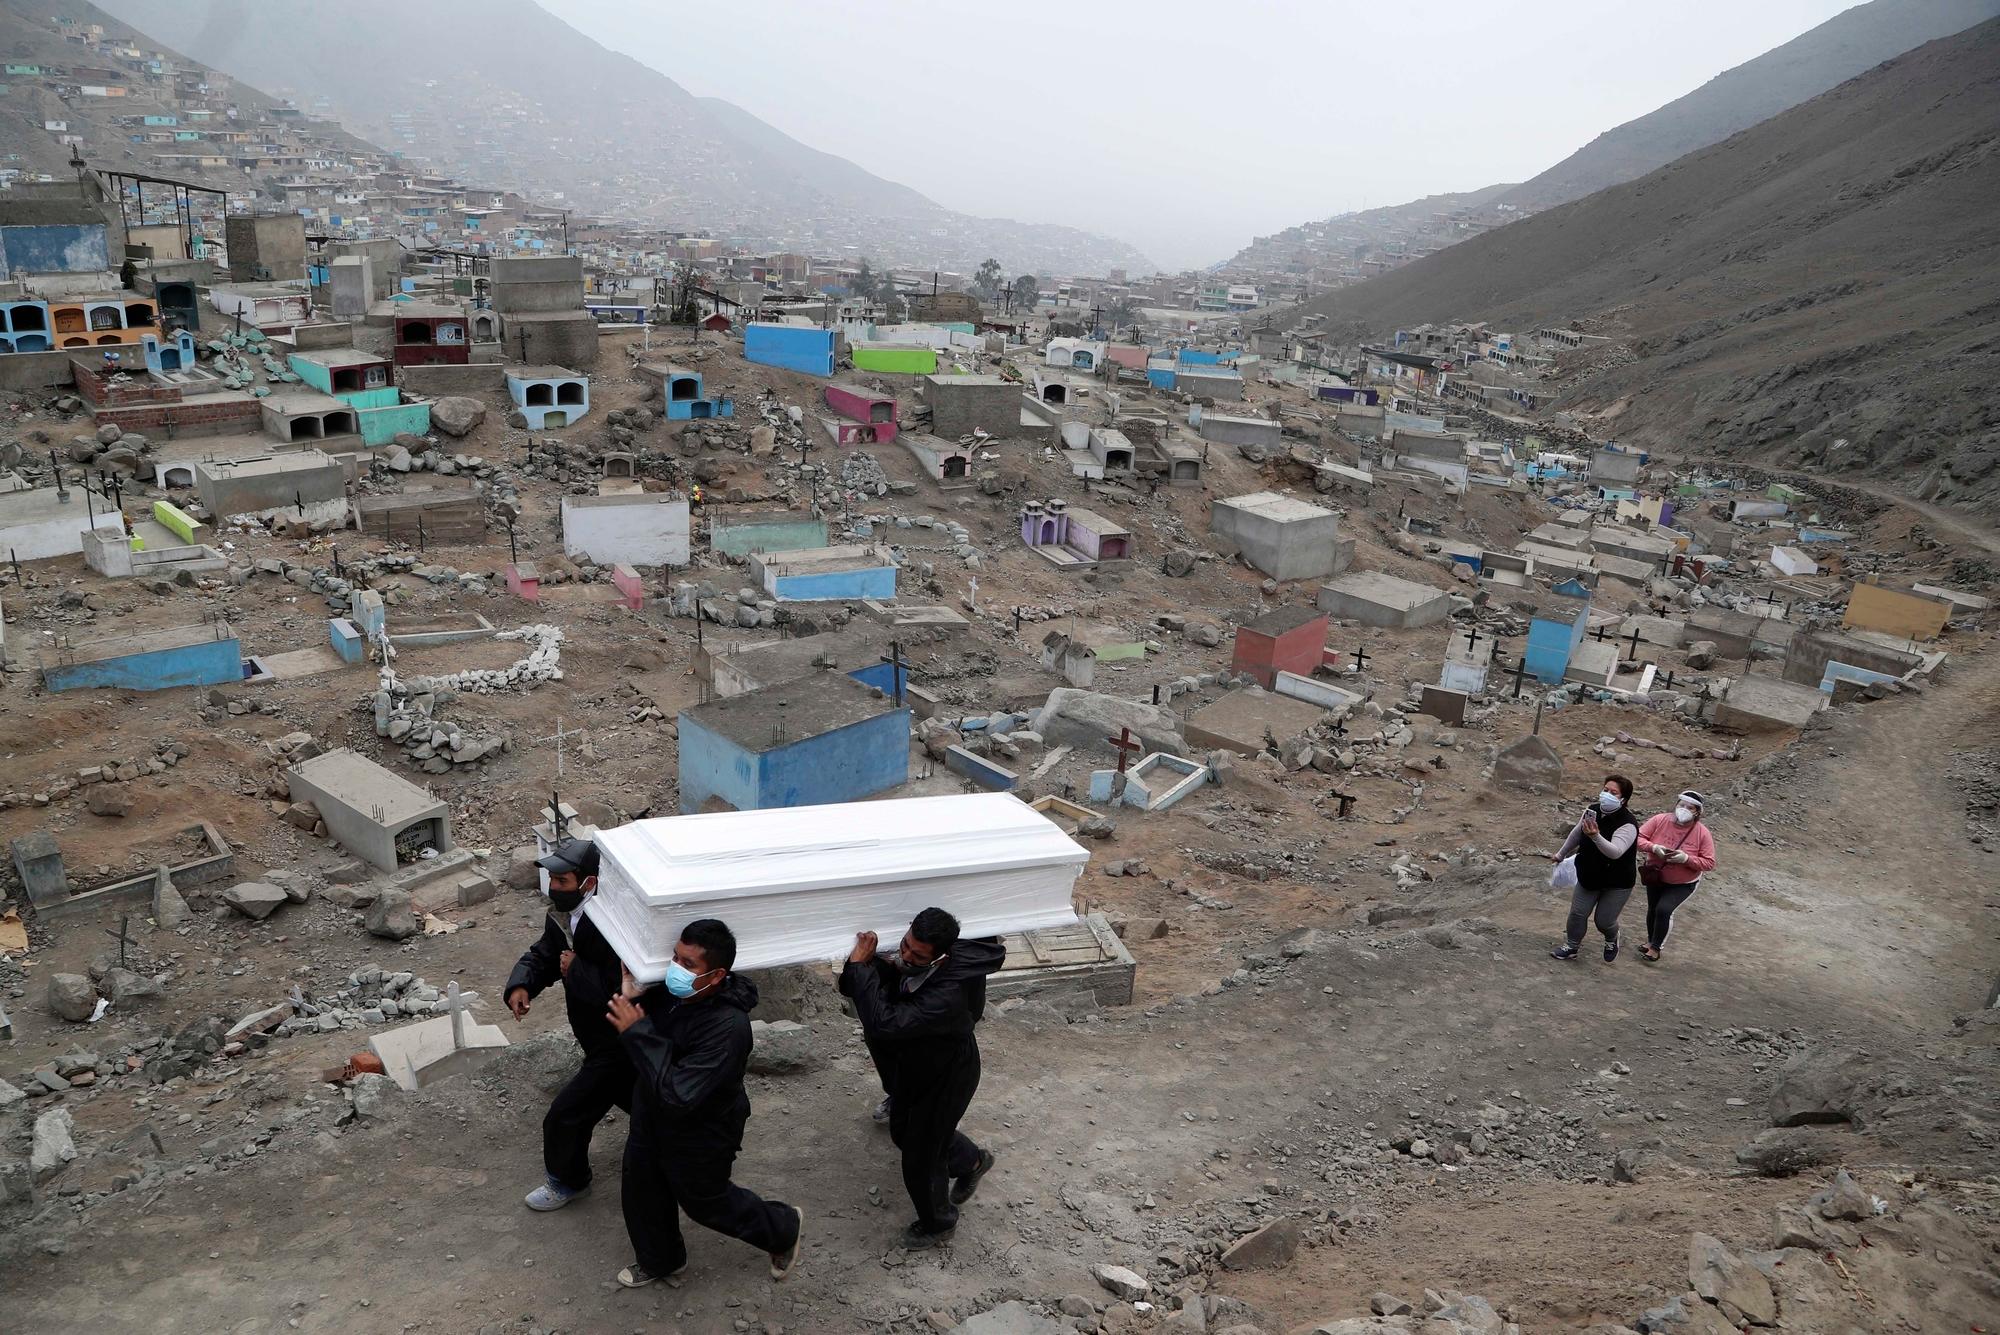 Cemetery workers carry the coffin that contains the remains of Wilson Gil, who family members say died of COVID-19 related complications, to a burial site at the Martires 19 de Julio cemetery on the outskirts of Lima, Peru, Wednesday, Aug. 26, 2020. The South American country has the highest number of new coronavirus infections in Latin America after Brazil. (AP Photo/Martin Mejia)